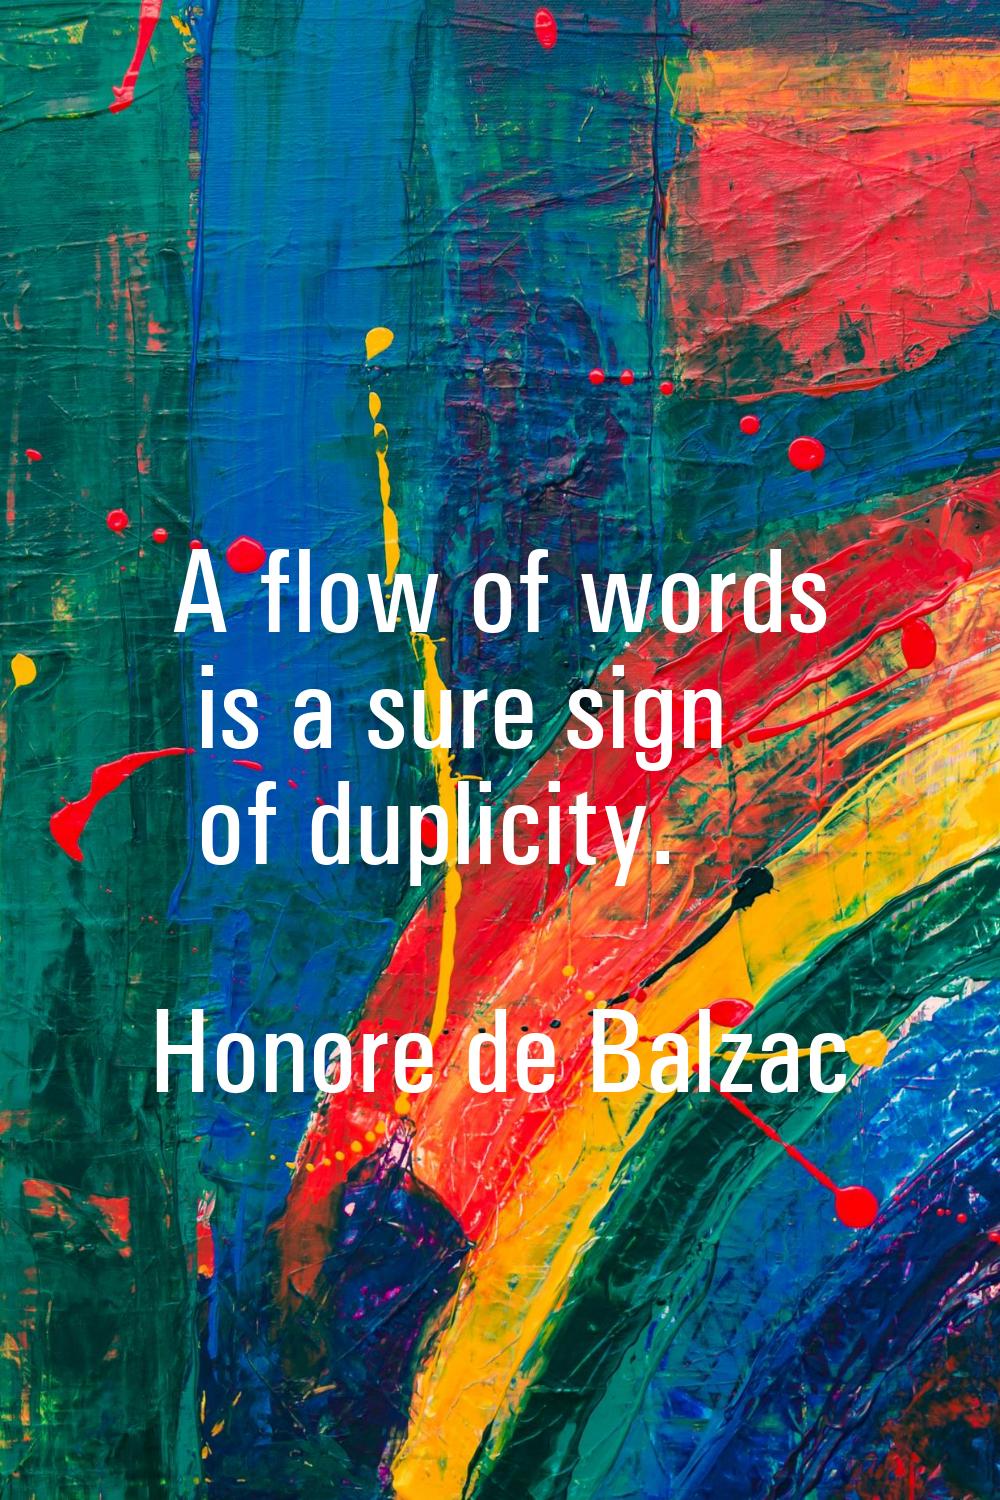 A flow of words is a sure sign of duplicity.